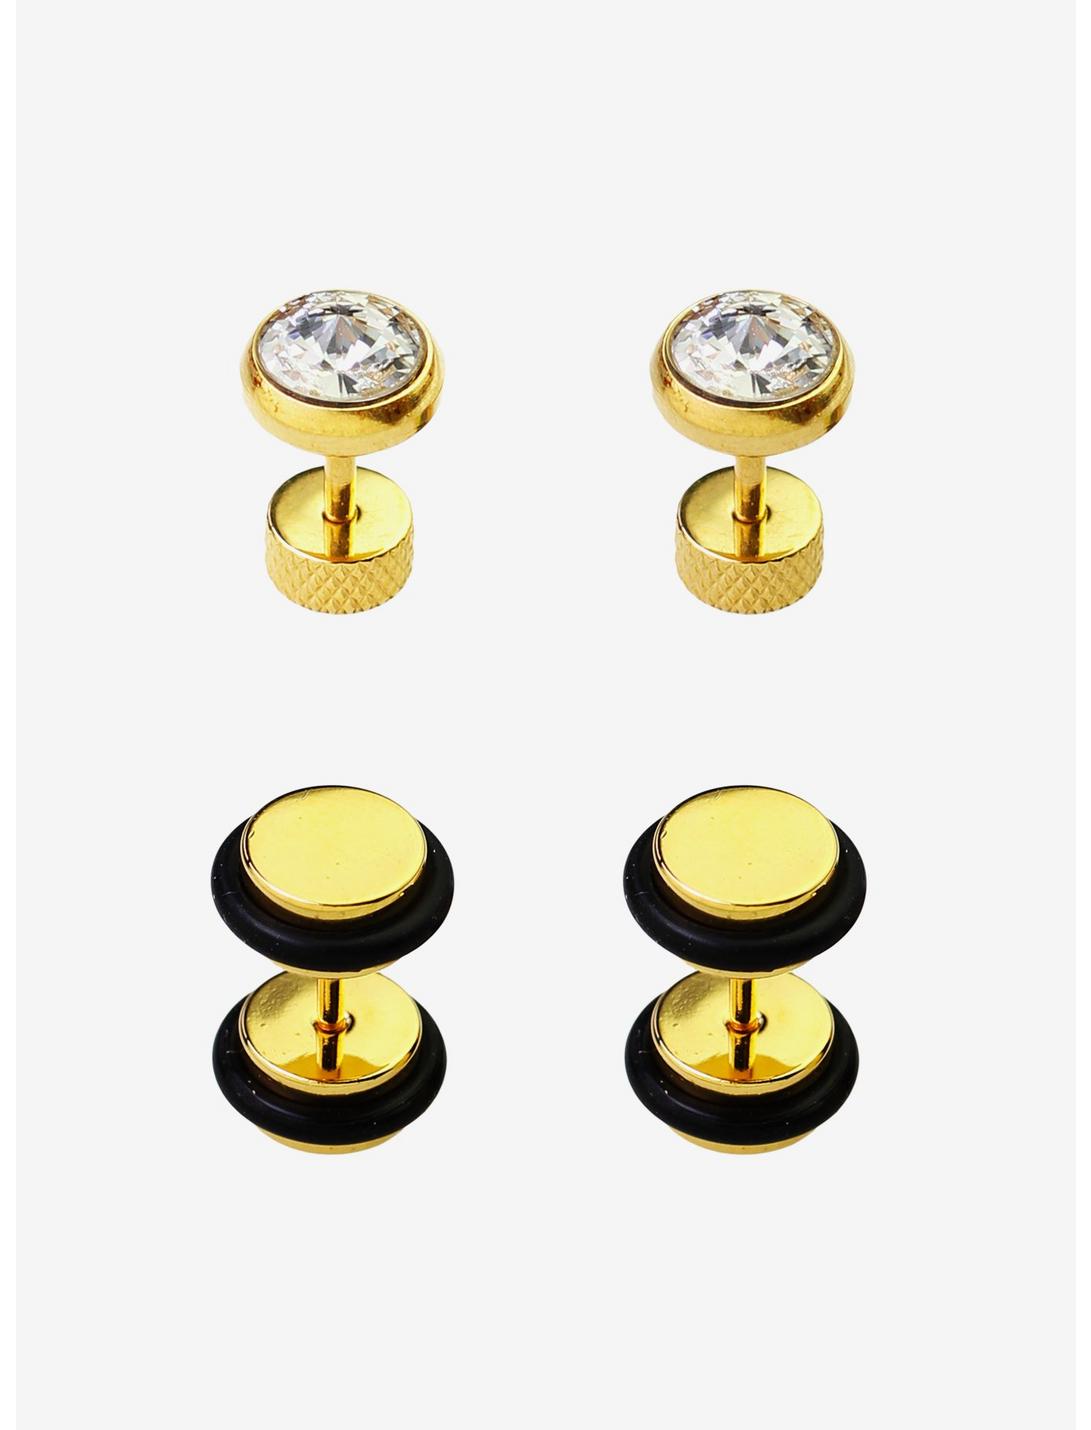 Gold And Clear Bling Faux Plug 4 Pack, , hi-res